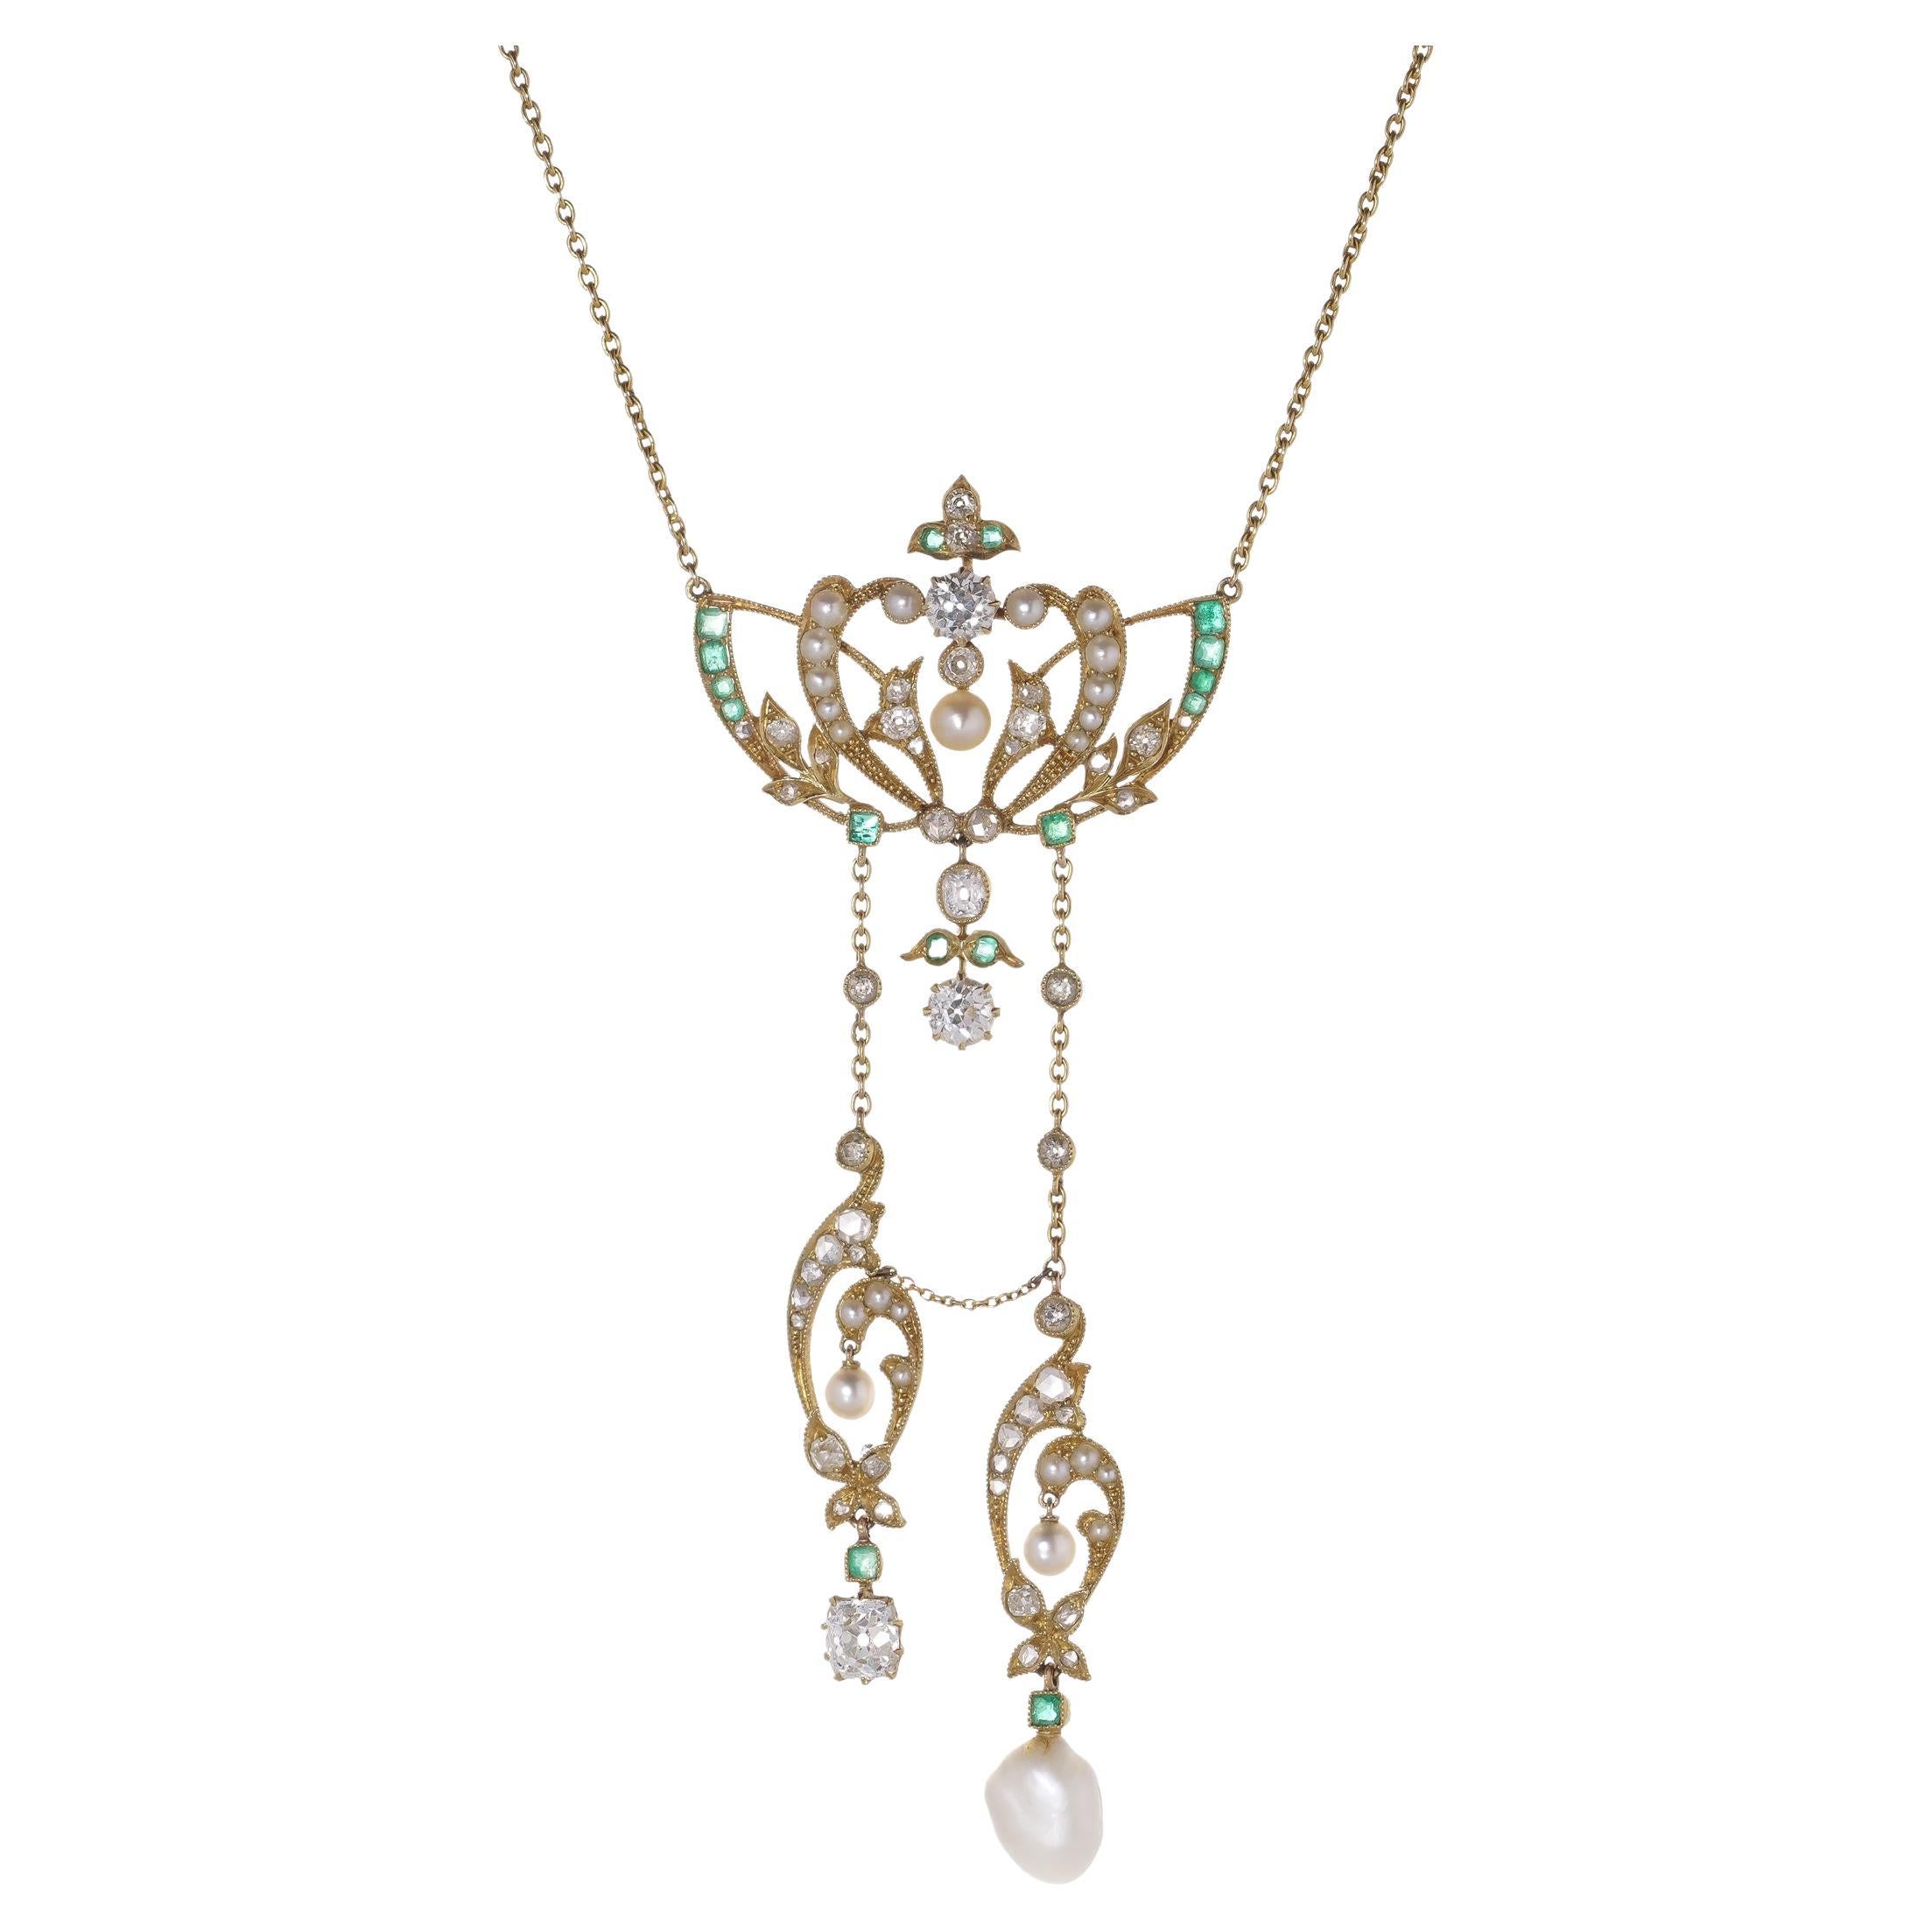 At Nouveau 15kt. gold pendant necklace with diamonds, emeralds and pearls